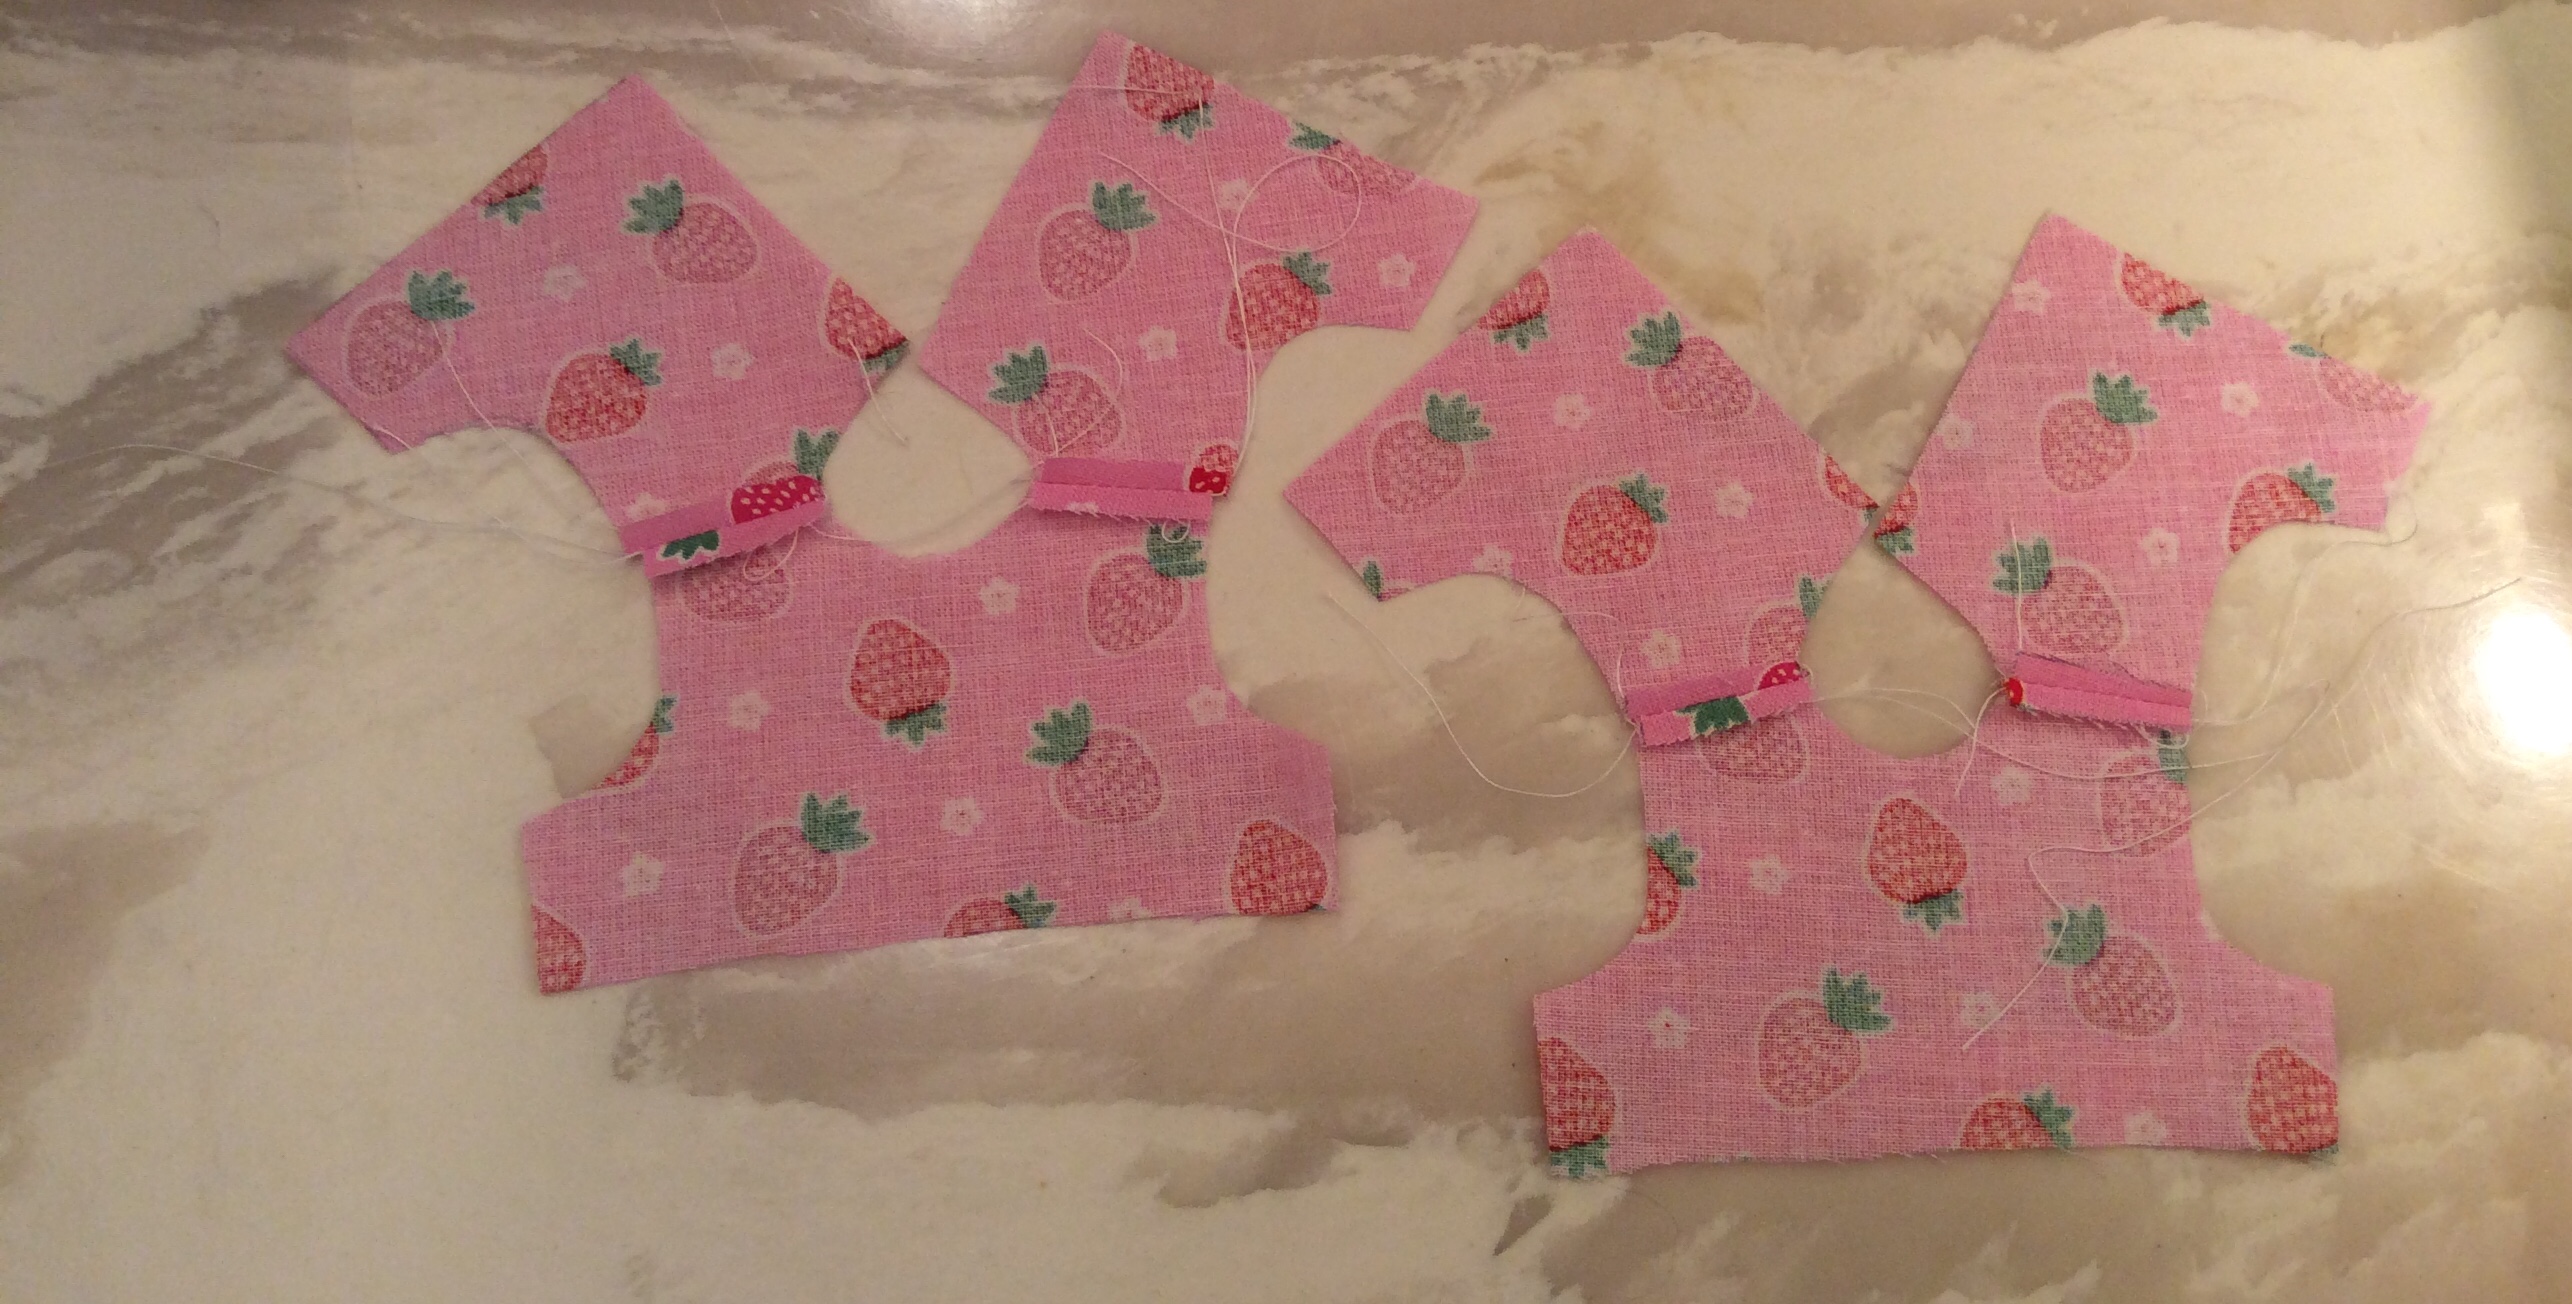 Sewing Patterns for Bitty Baby Doll Clothes — Pin Cut Sew Studio